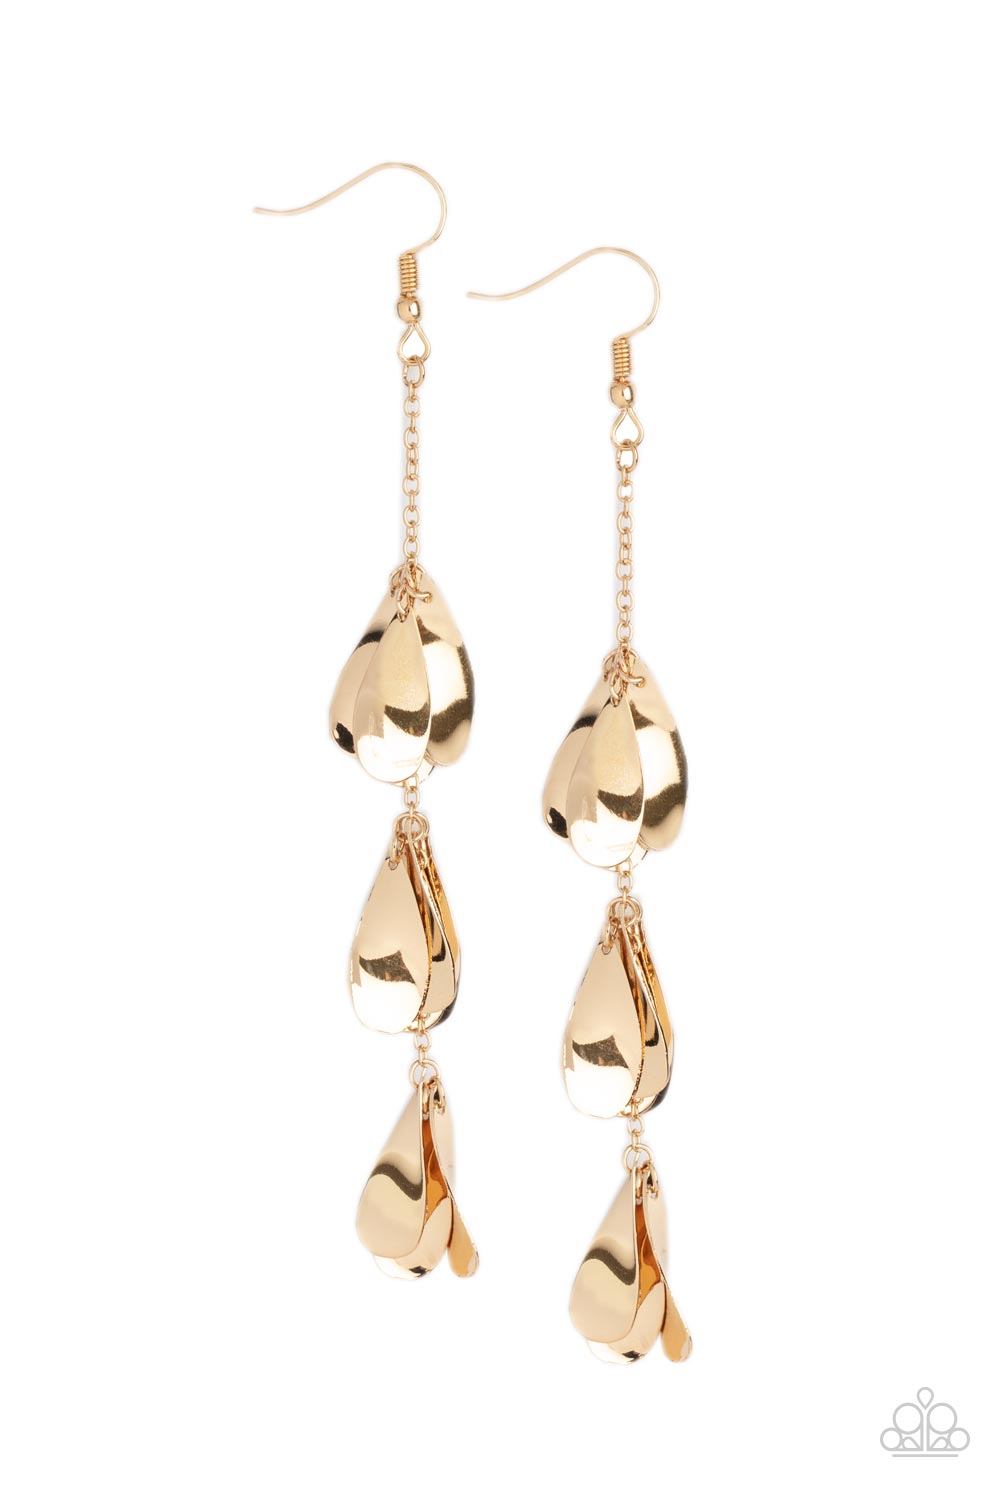 Paparazzi Earrings - Arrival Chime - Gold